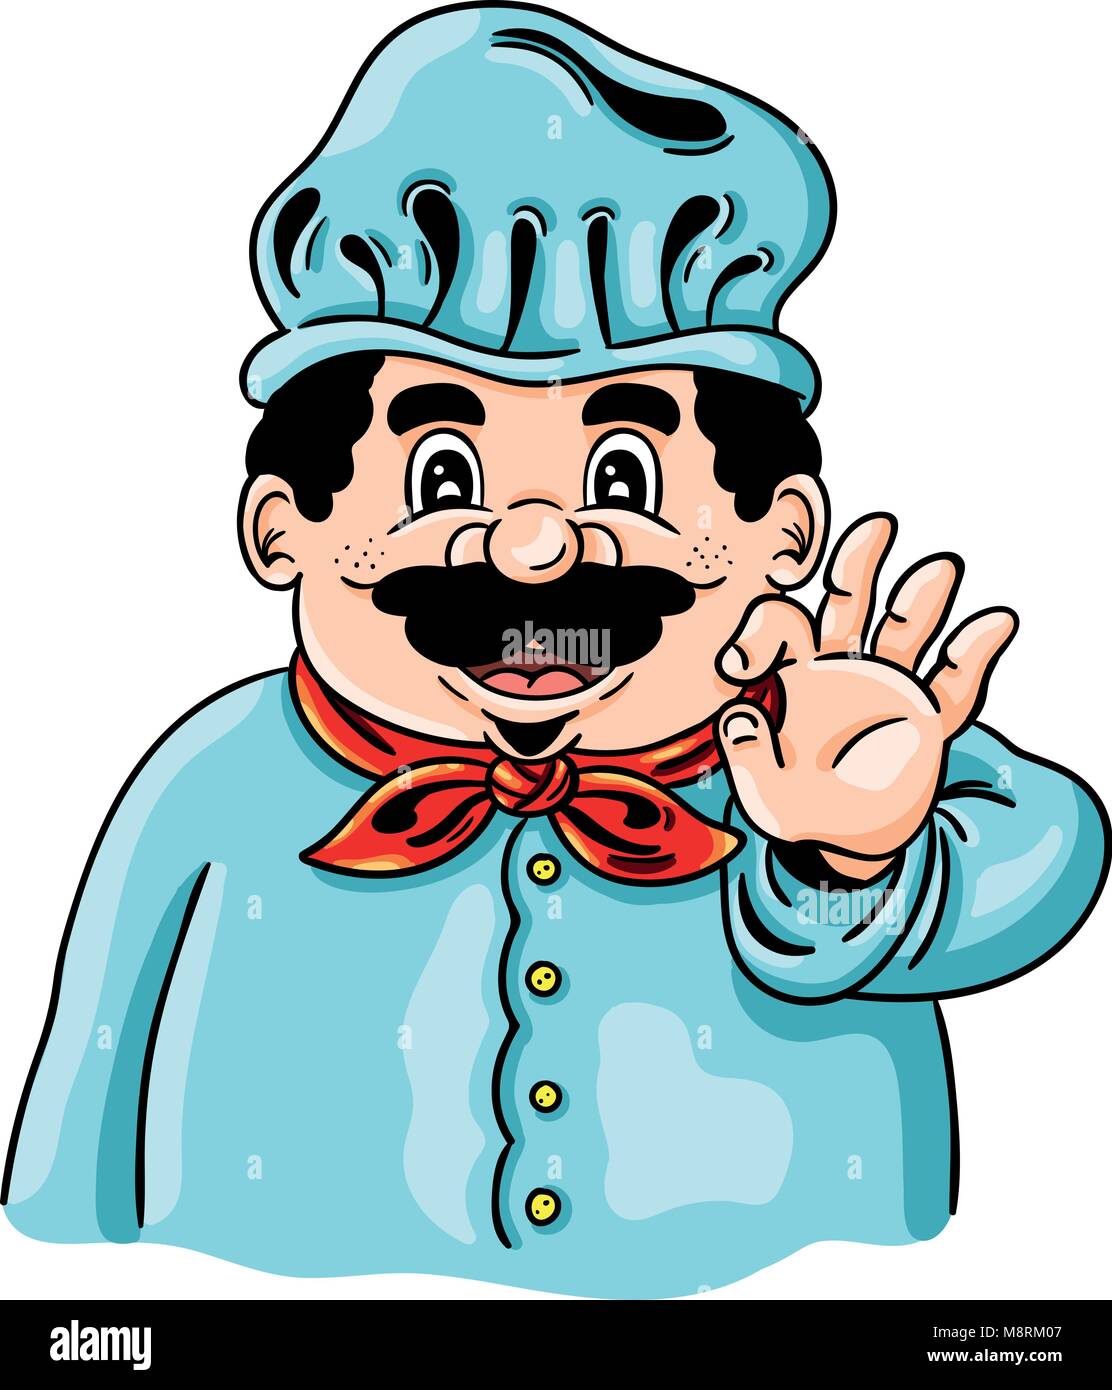 Funny illustration of happy chef with moustache. Stock Vector